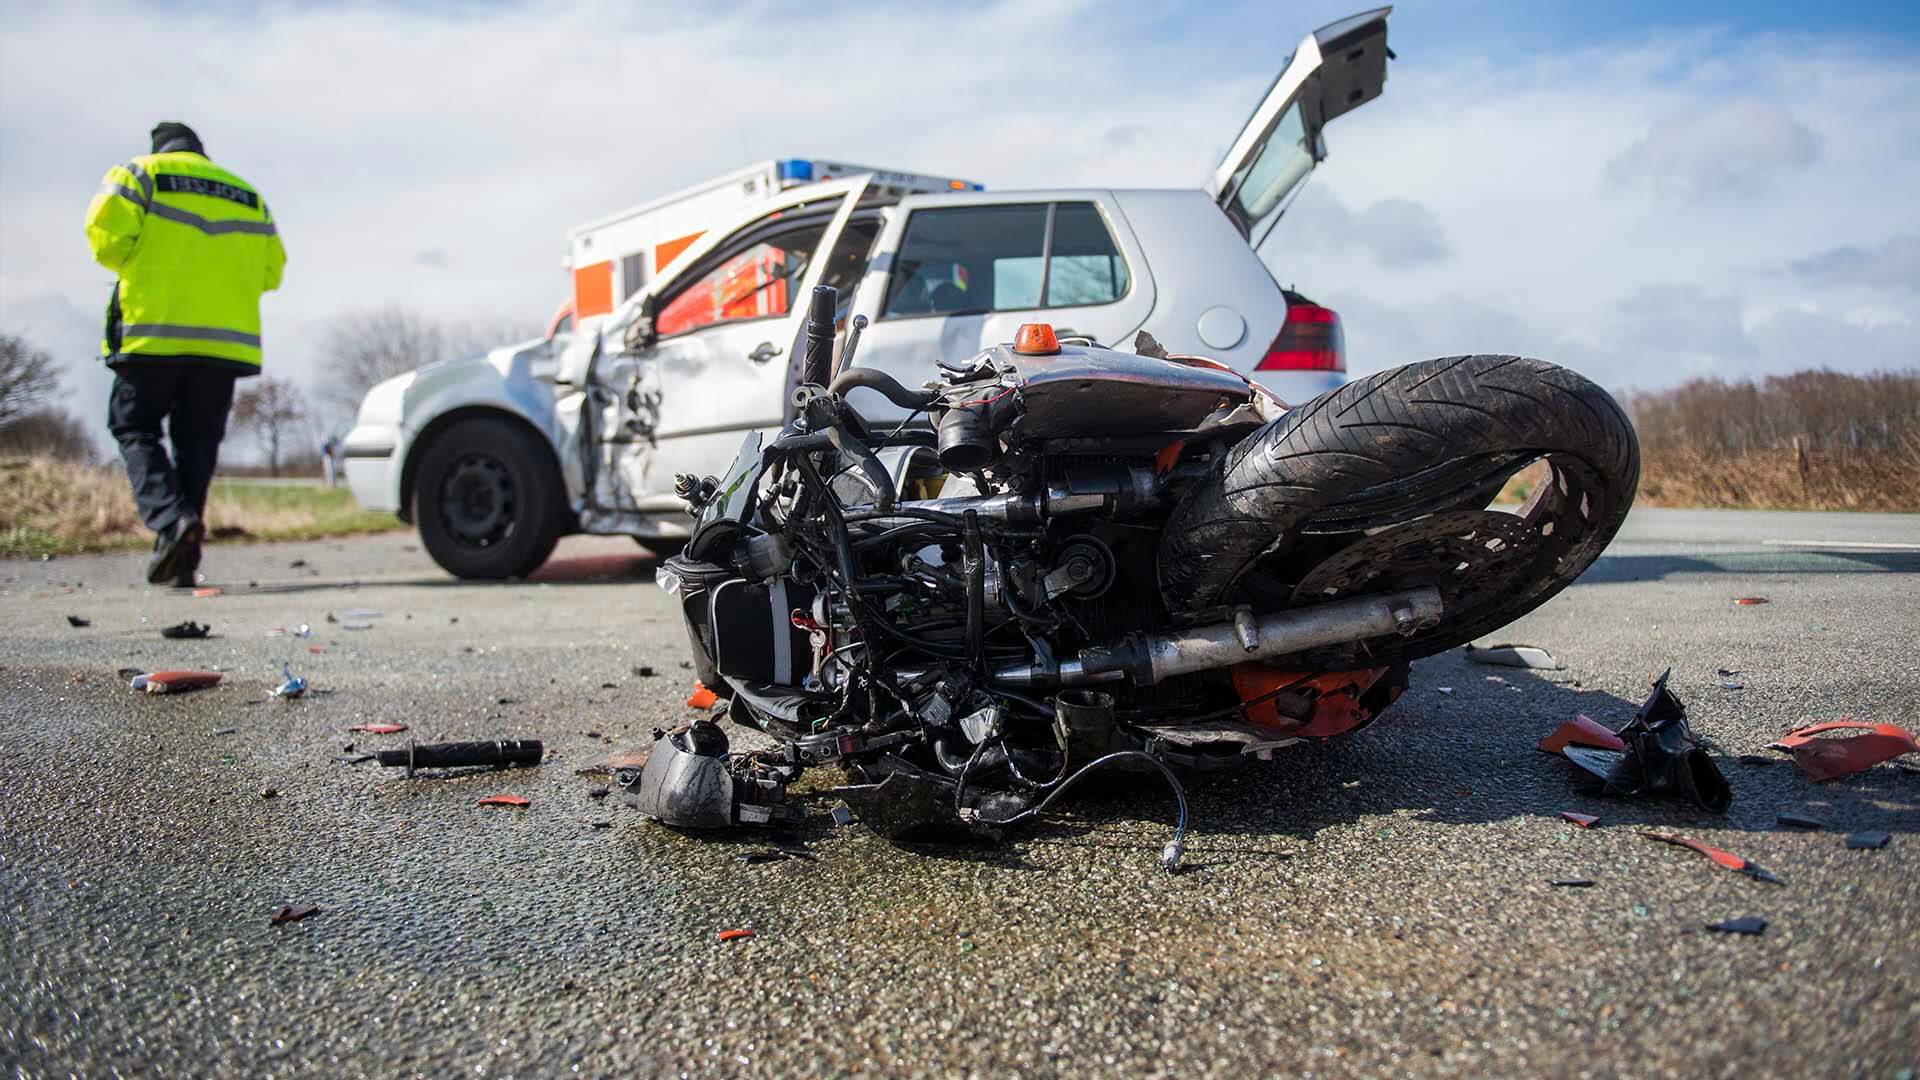 A destroyed motorcyle laying on road after being involved in a car accident